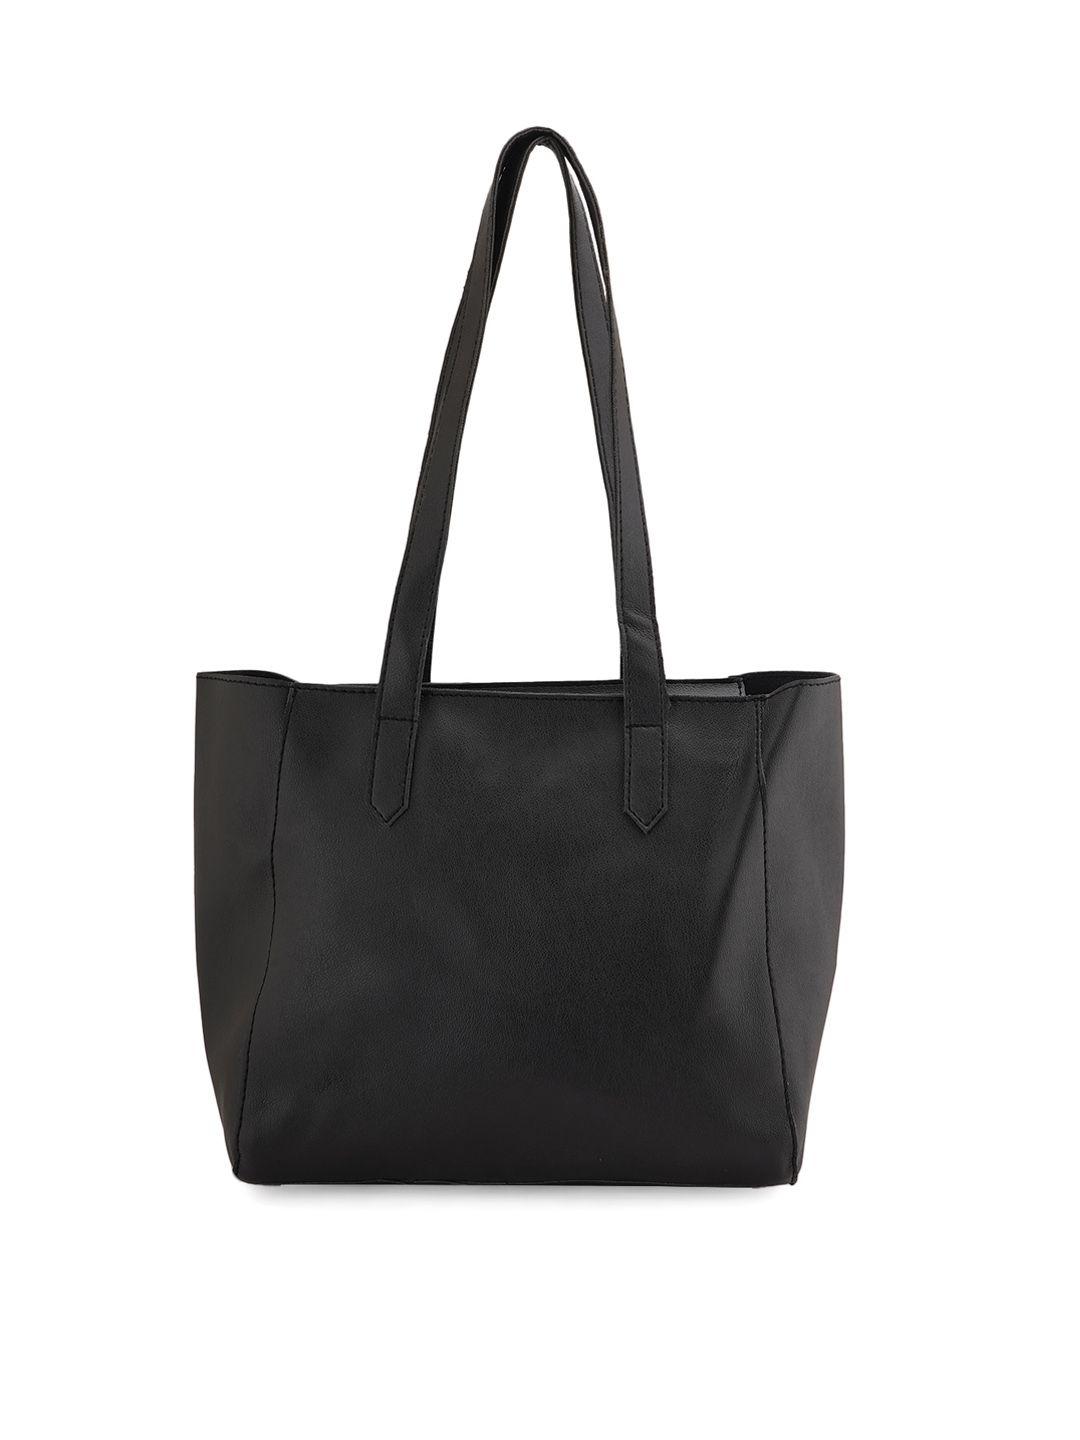 style shoes black structured tote bag